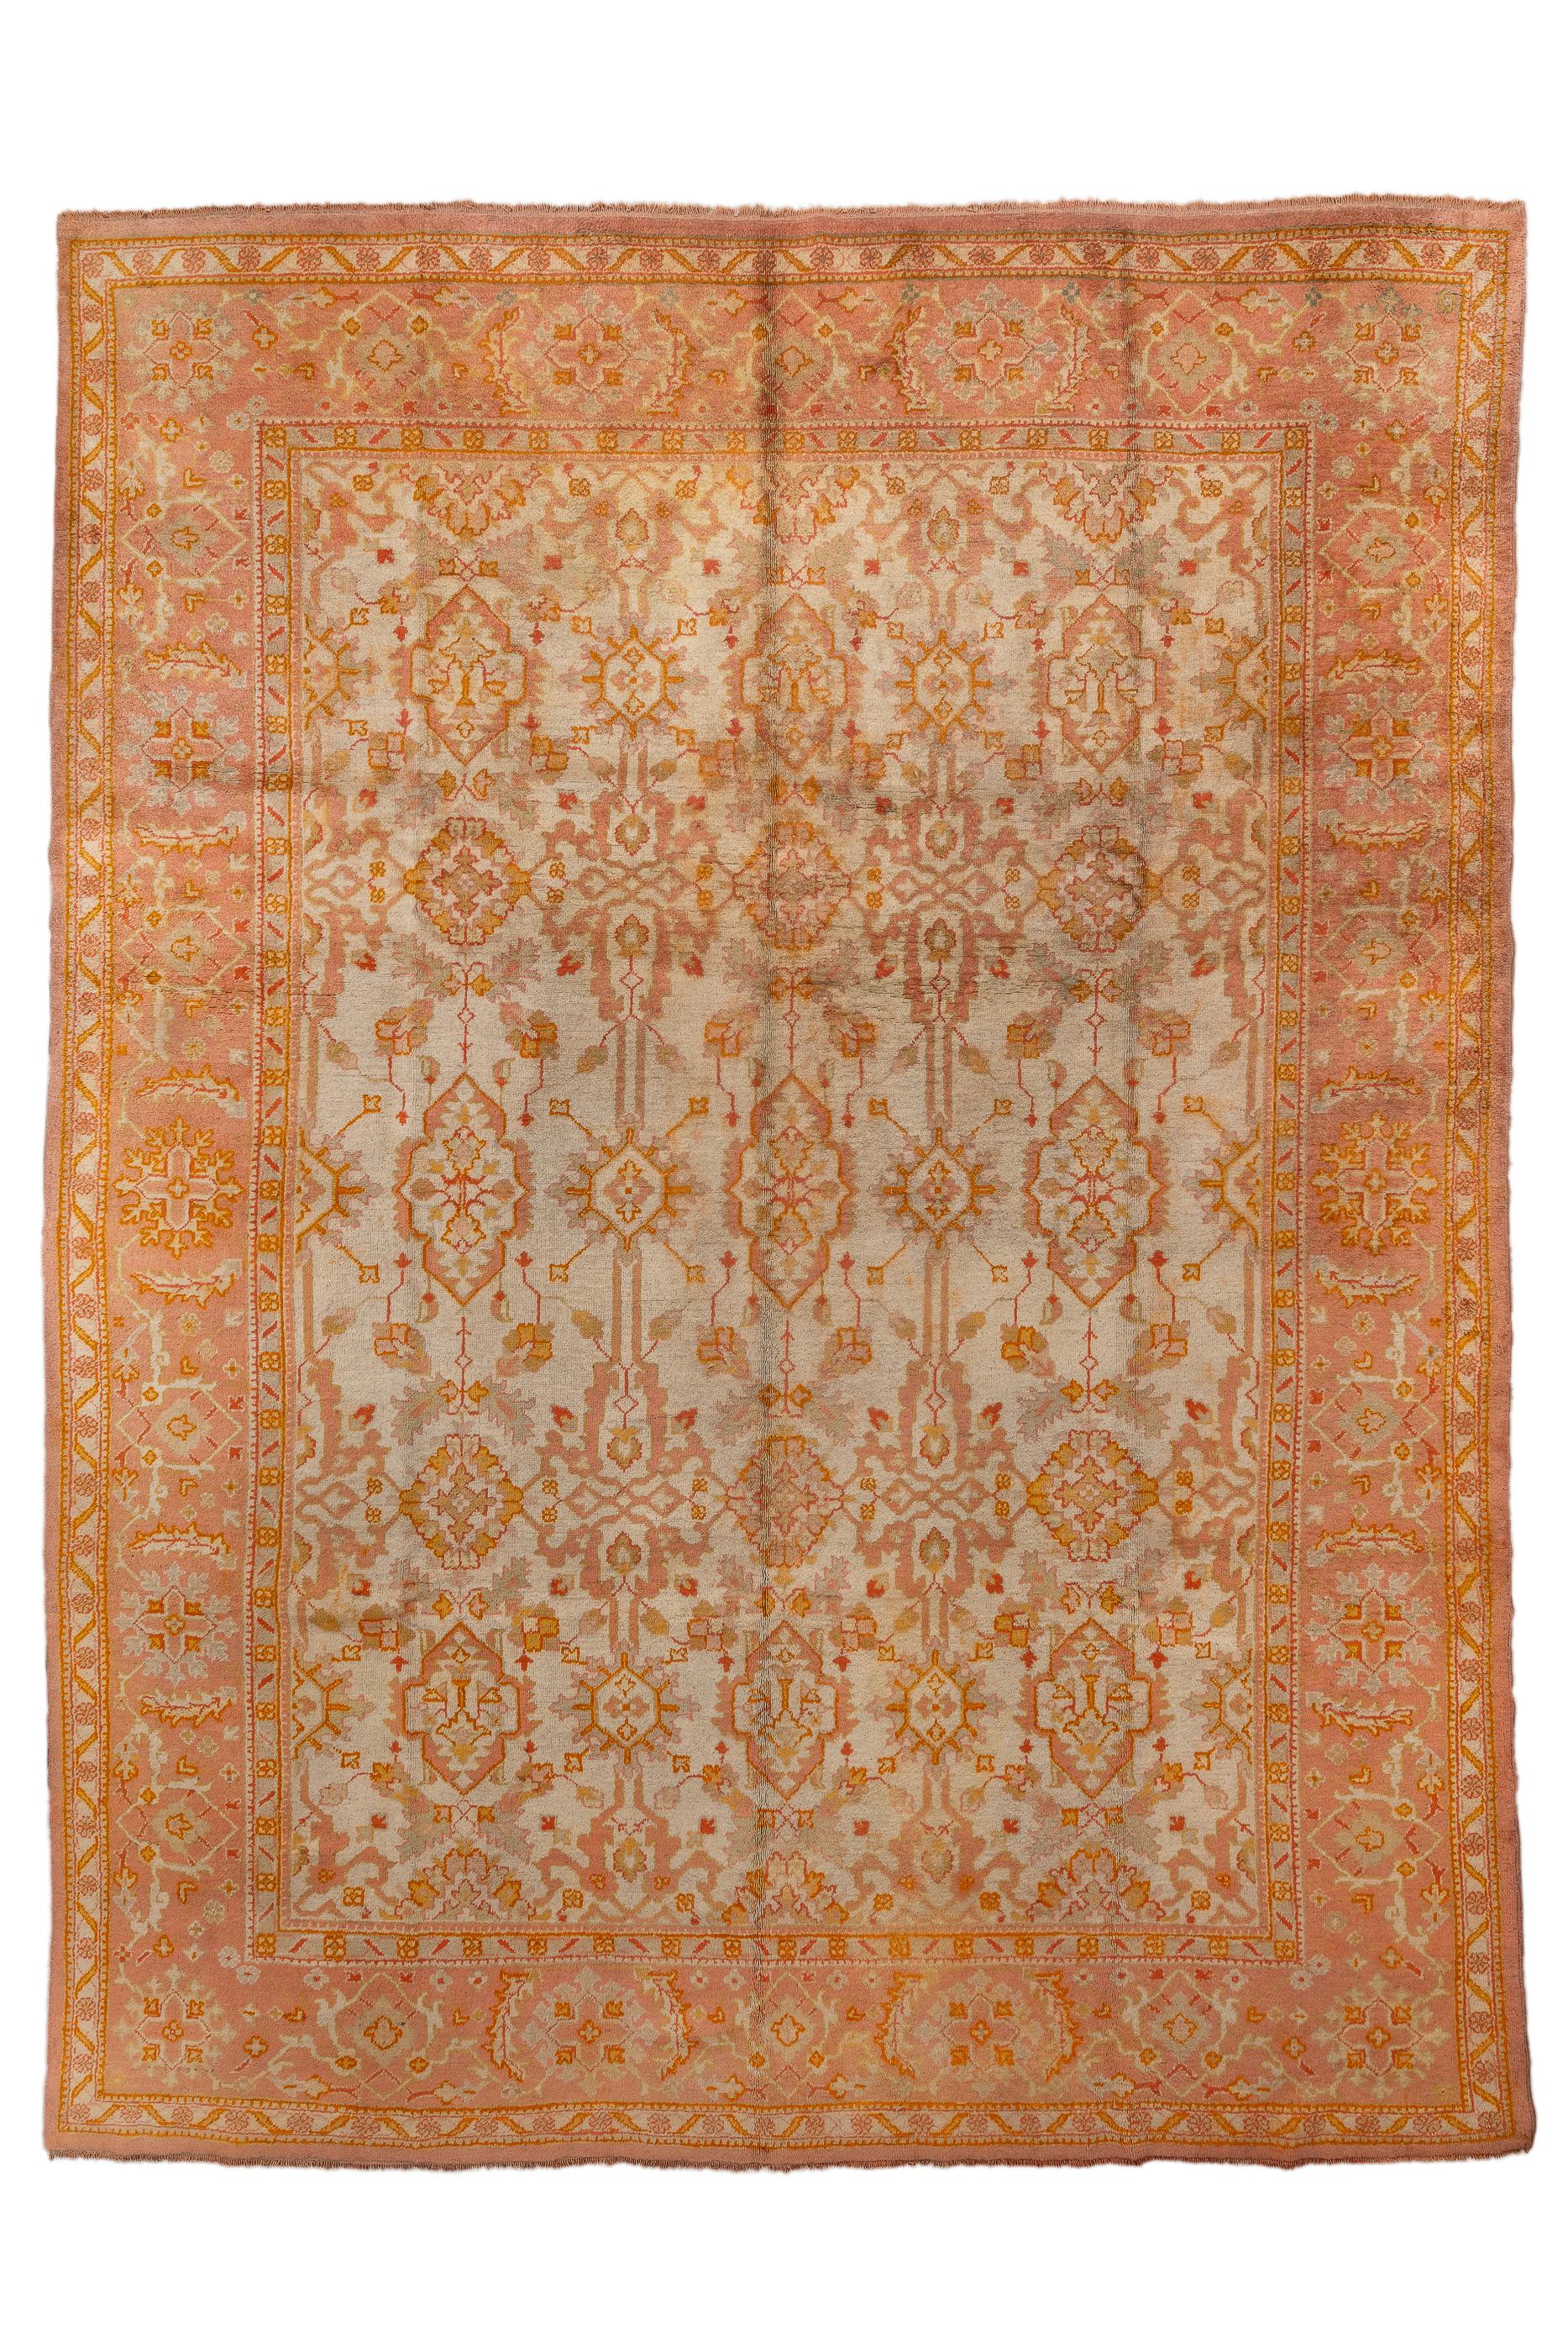 The straw-ecru field of this western Anatolian city carpet shows  five column, five full row,  pattern of open, pointed cartouches,  stepped lozenges and other unusual elements, all accented in goldenrod,  rust and green. Boder of  large rosettes,